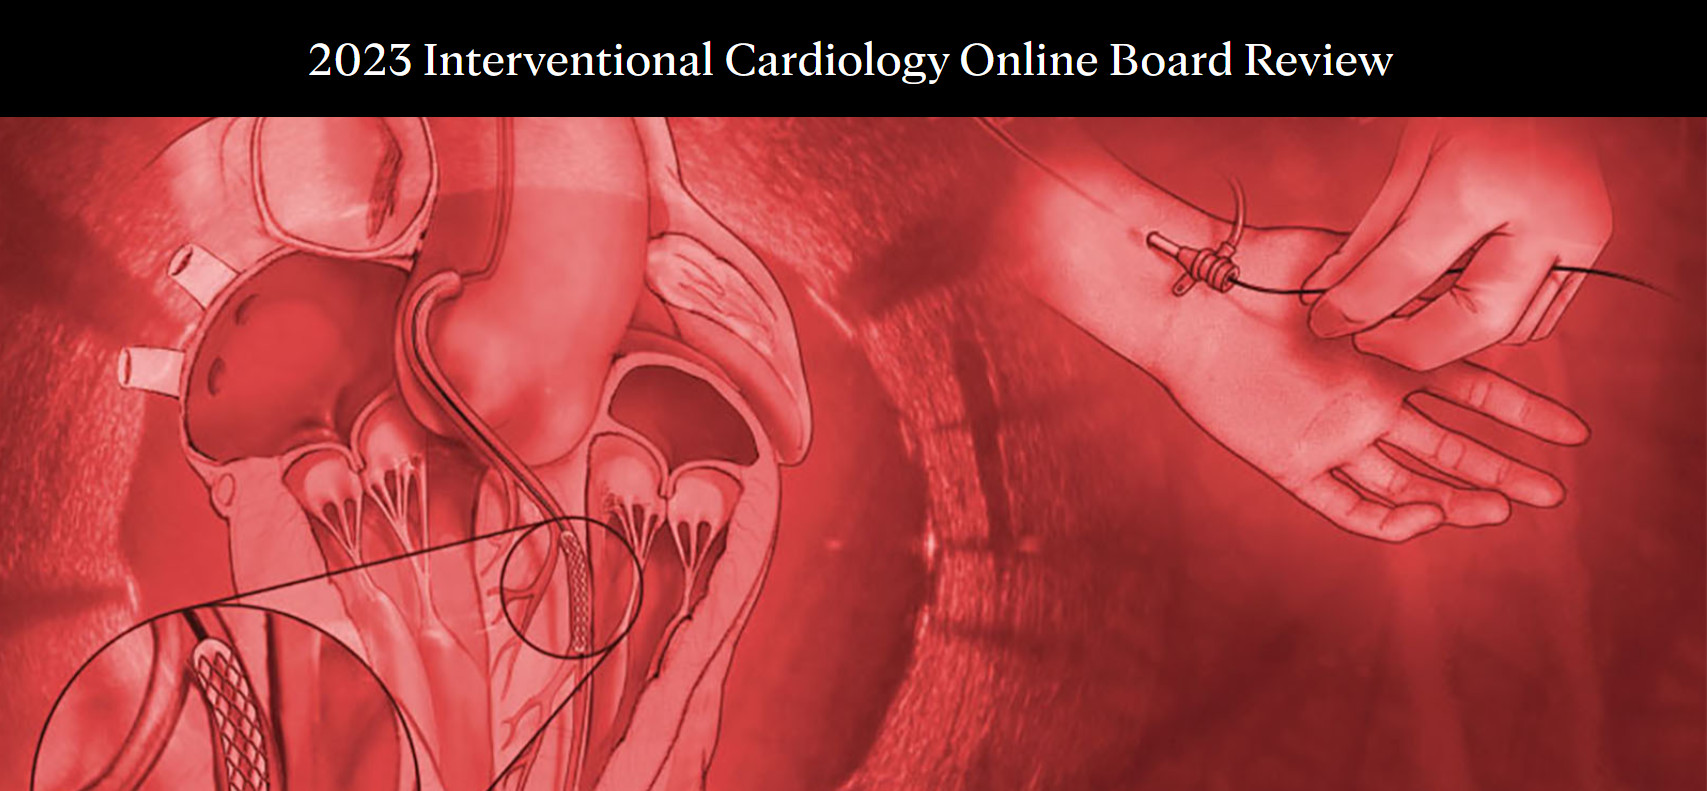 Mayo 2023 Interventional Cardiology Online Board Review